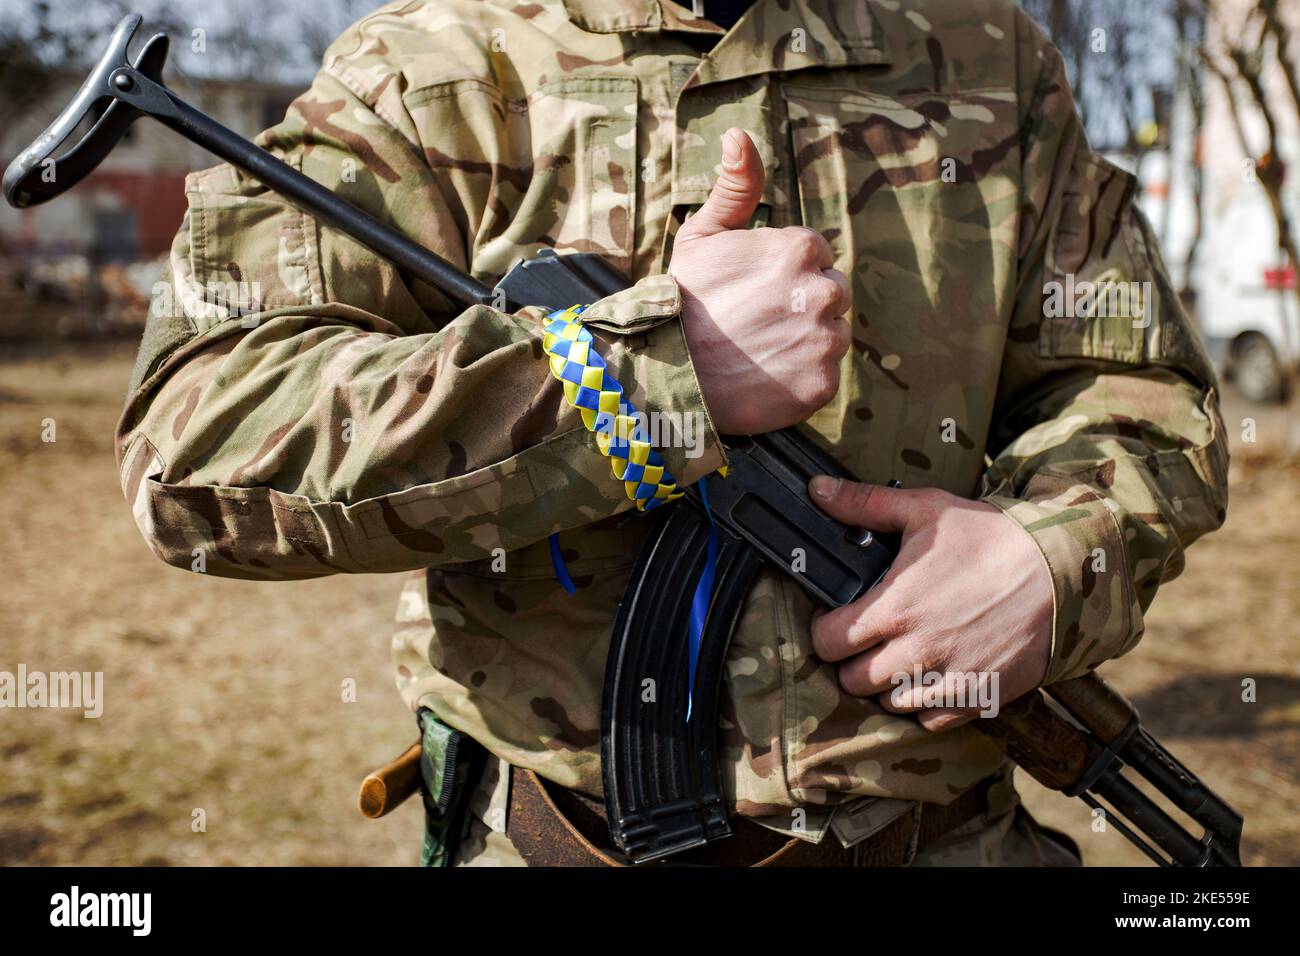 The man in camouflage with yellow and blue ribbon wristlet on his hand holding automatic Kalashnikov rifle Stock Photo